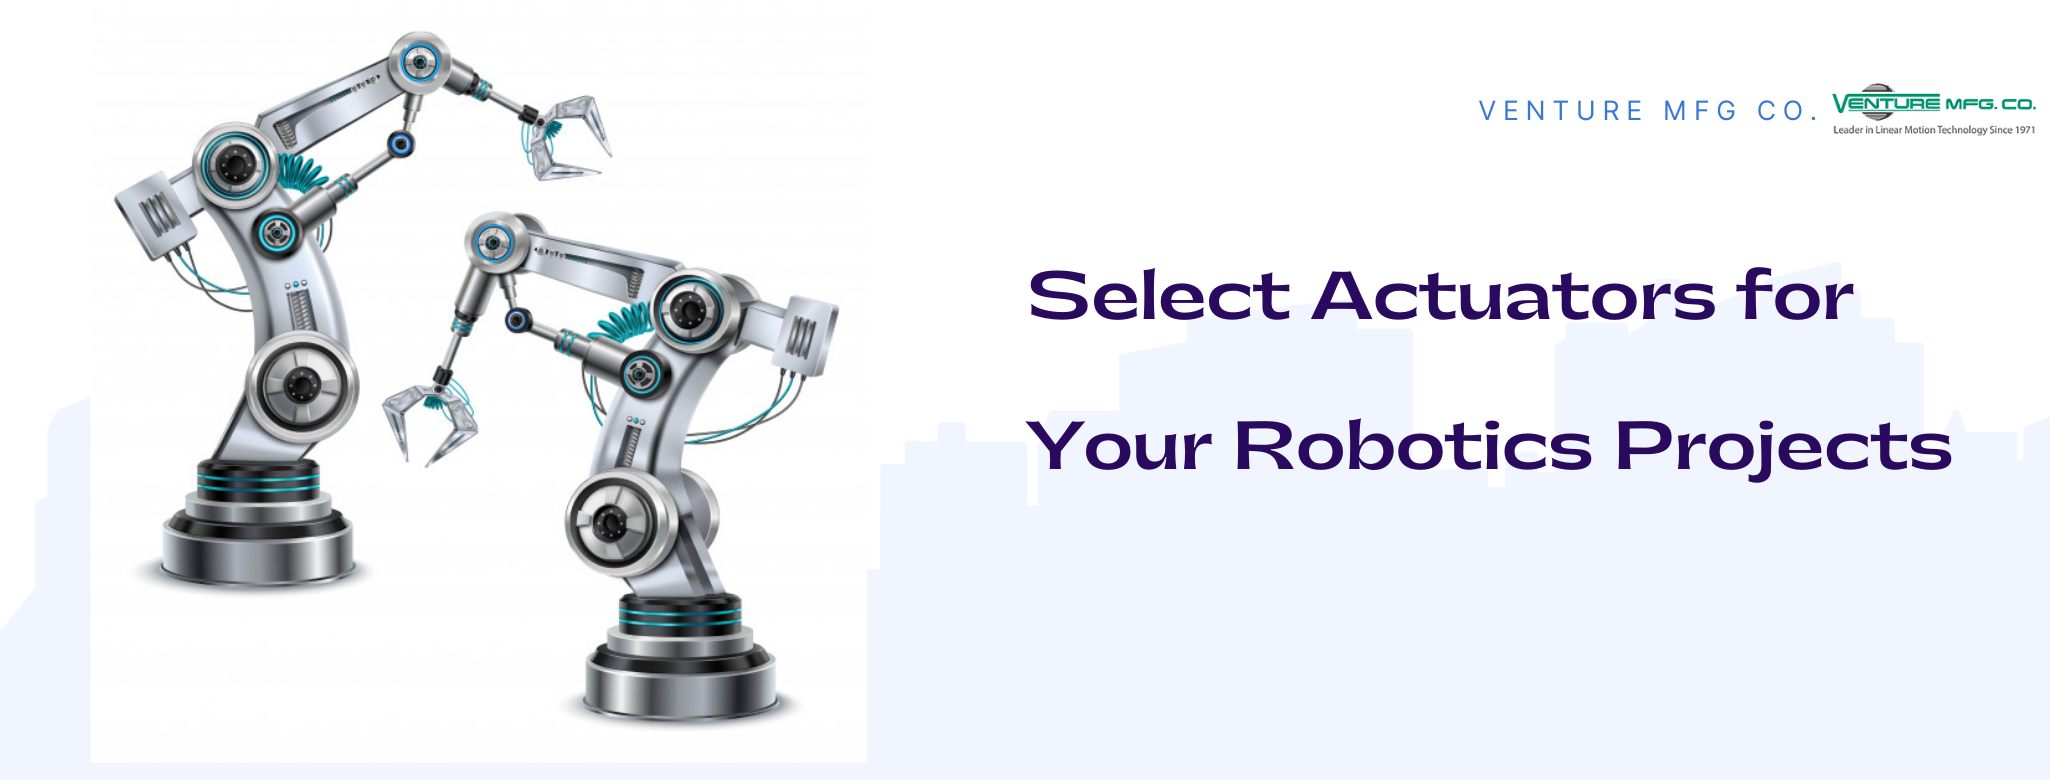 døråbning lineær Ti A Brief Guide to Select Actuators for Your Robotics Projects - Venture Mfg.  Co.